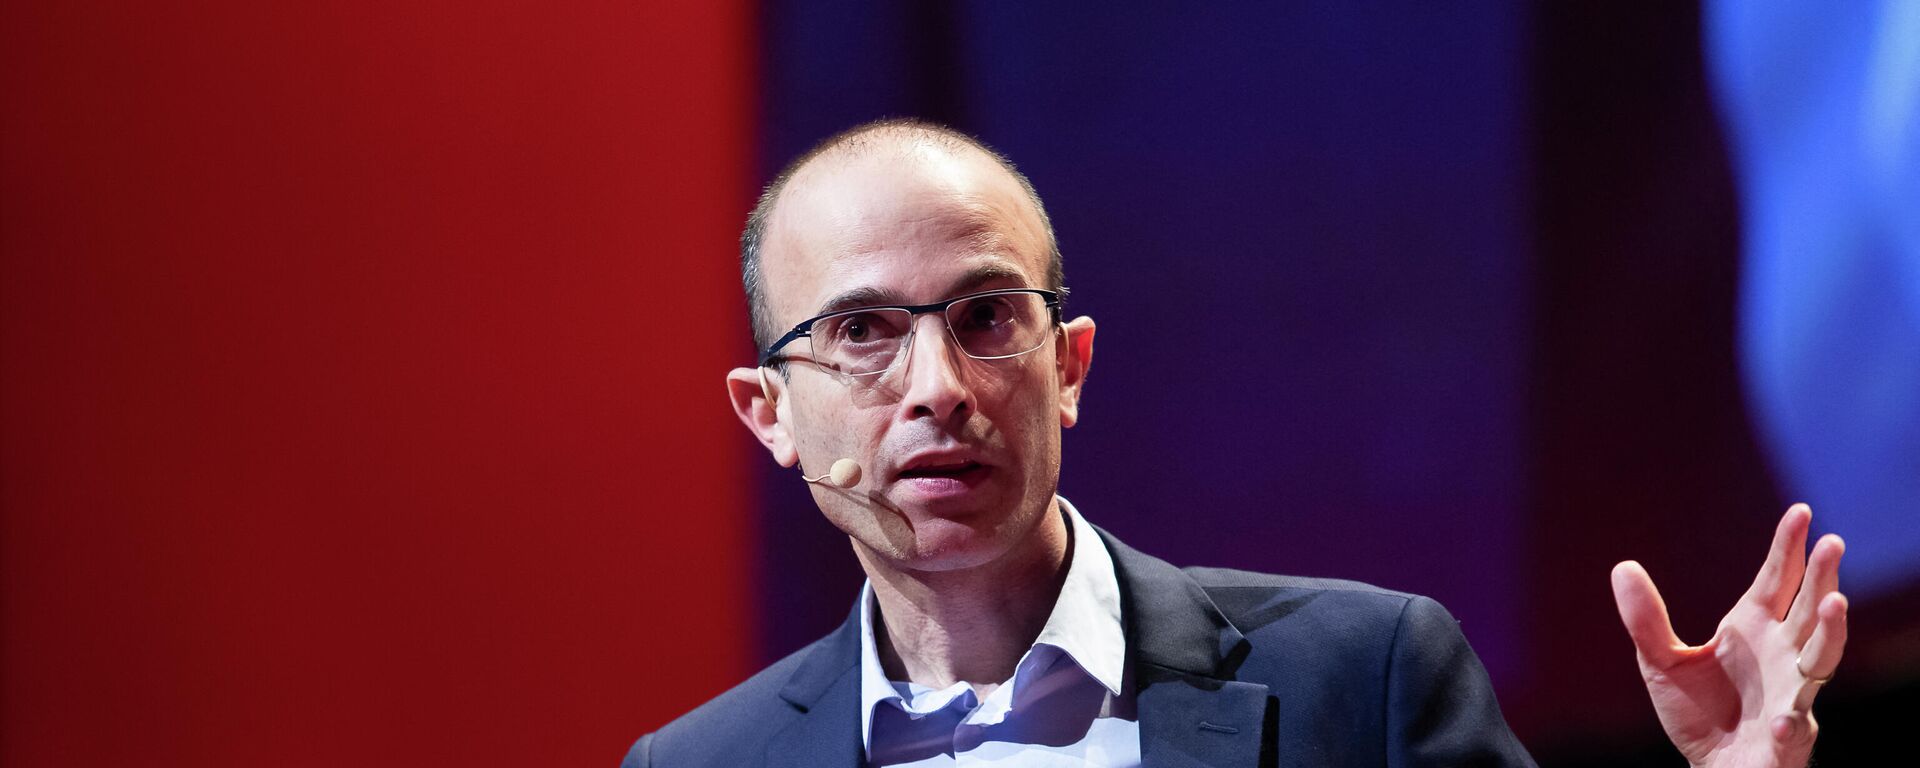 Israeli author, historian and professor Yuval Noah Harari addresses after received a 'Doctor Honoris Causa' from the VUB University before a reading in Antwerp, on January 27, 2020. - Sputnik International, 1920, 01.11.2021